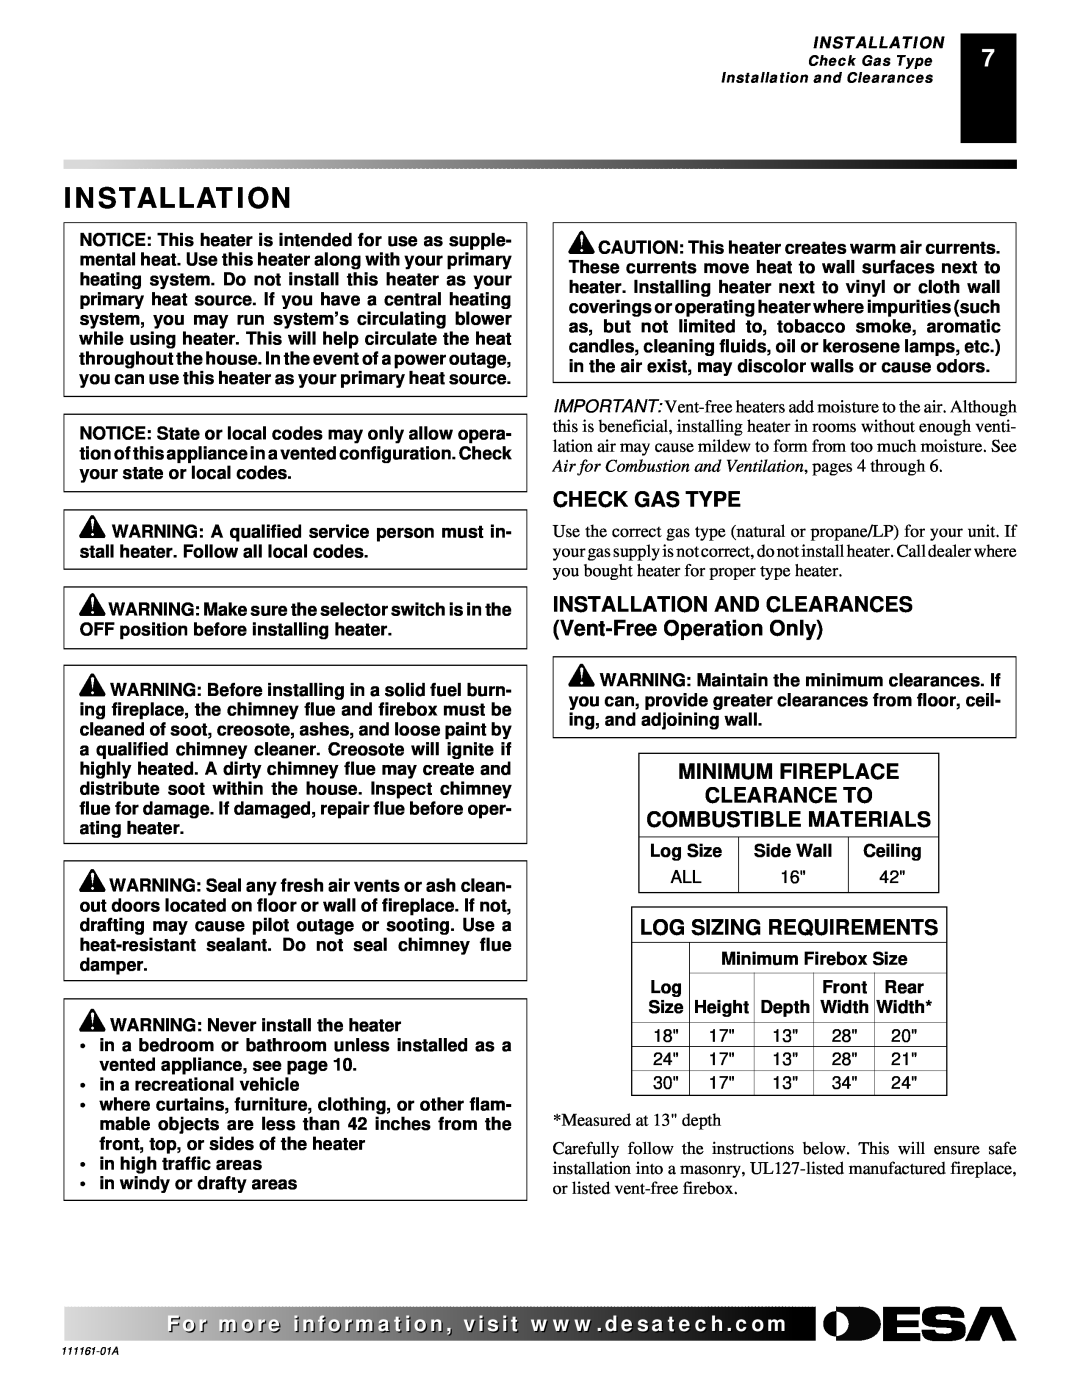 Desa CCL3924PRA, CCL3018NRA, CCL3930PRA Installation, Check Gas Type, Minimum Fireplace Clearance To, Combustible Materials 